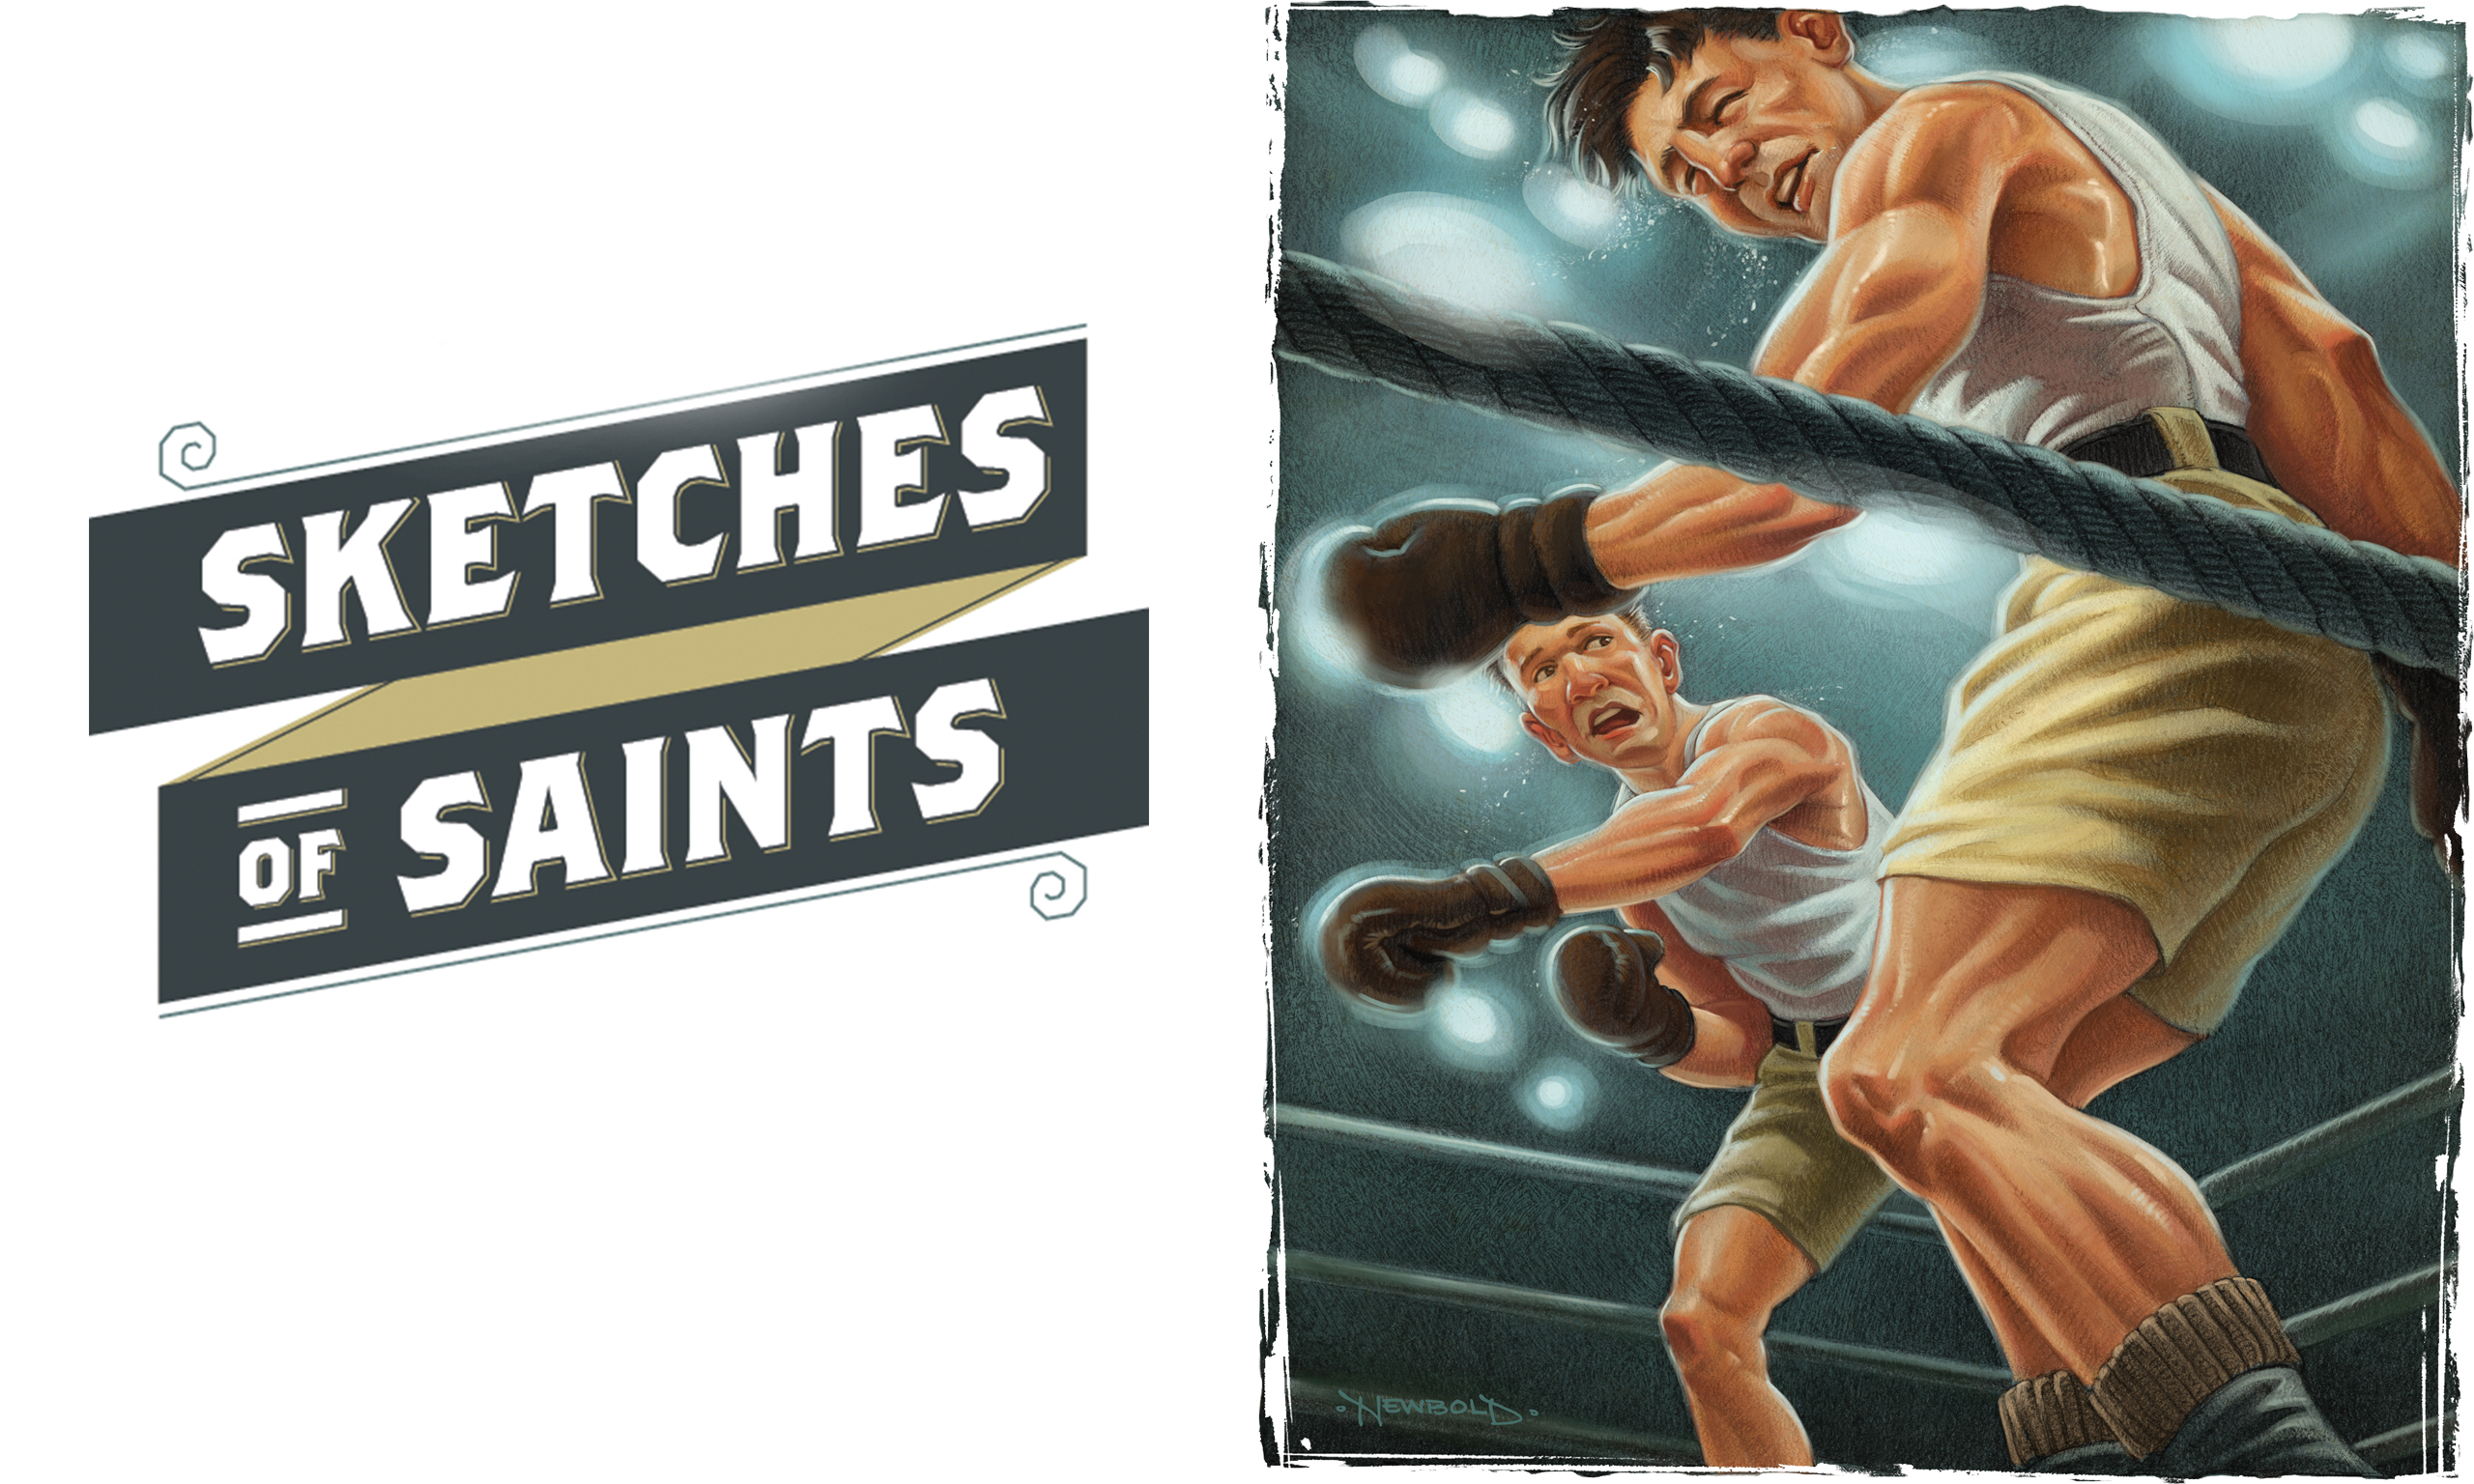 Illustration of two men in a boxing ring with the title of the article "Sketches of Saints"